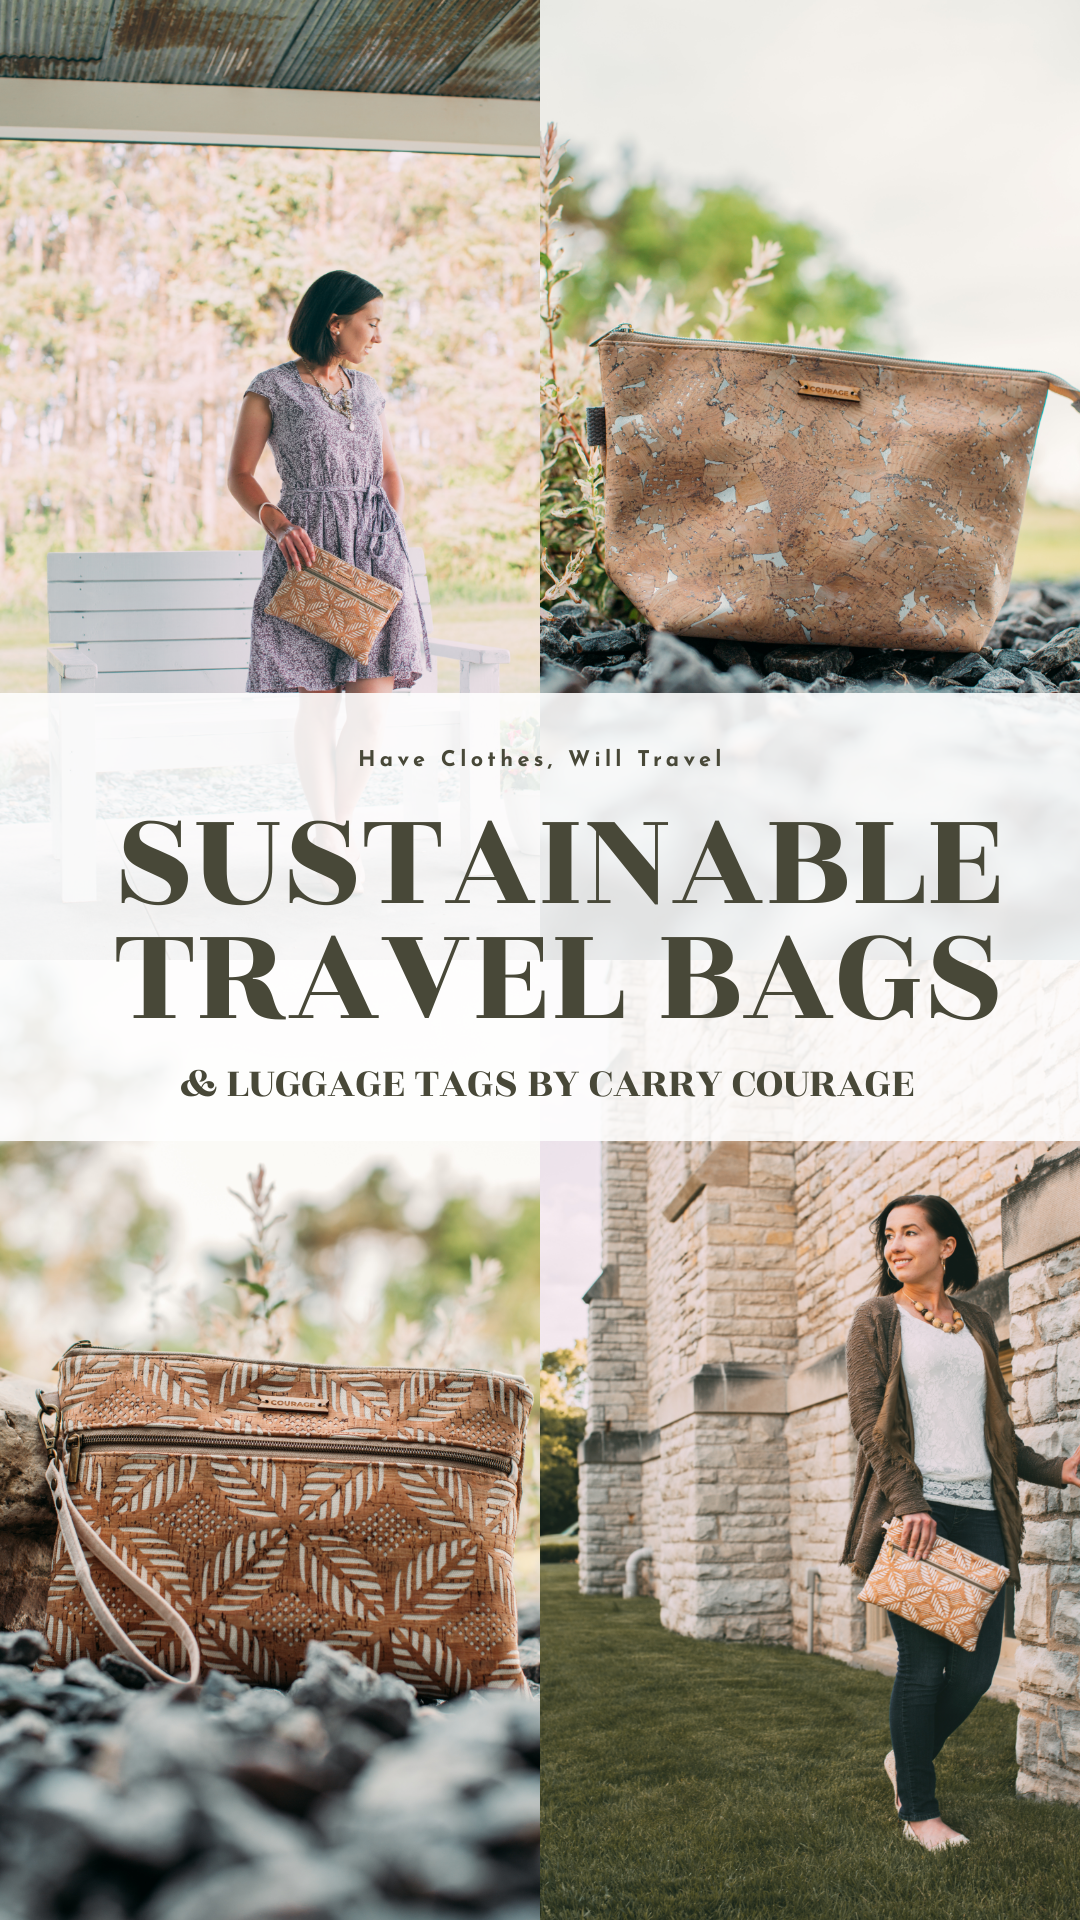 A Pinterest-style collage of images of Carry Courage travel bags and a woman posing, holding the bags. Text in the center of the image says, "Sustainable Travel Bags & Luggage Tags by Carry Courage"